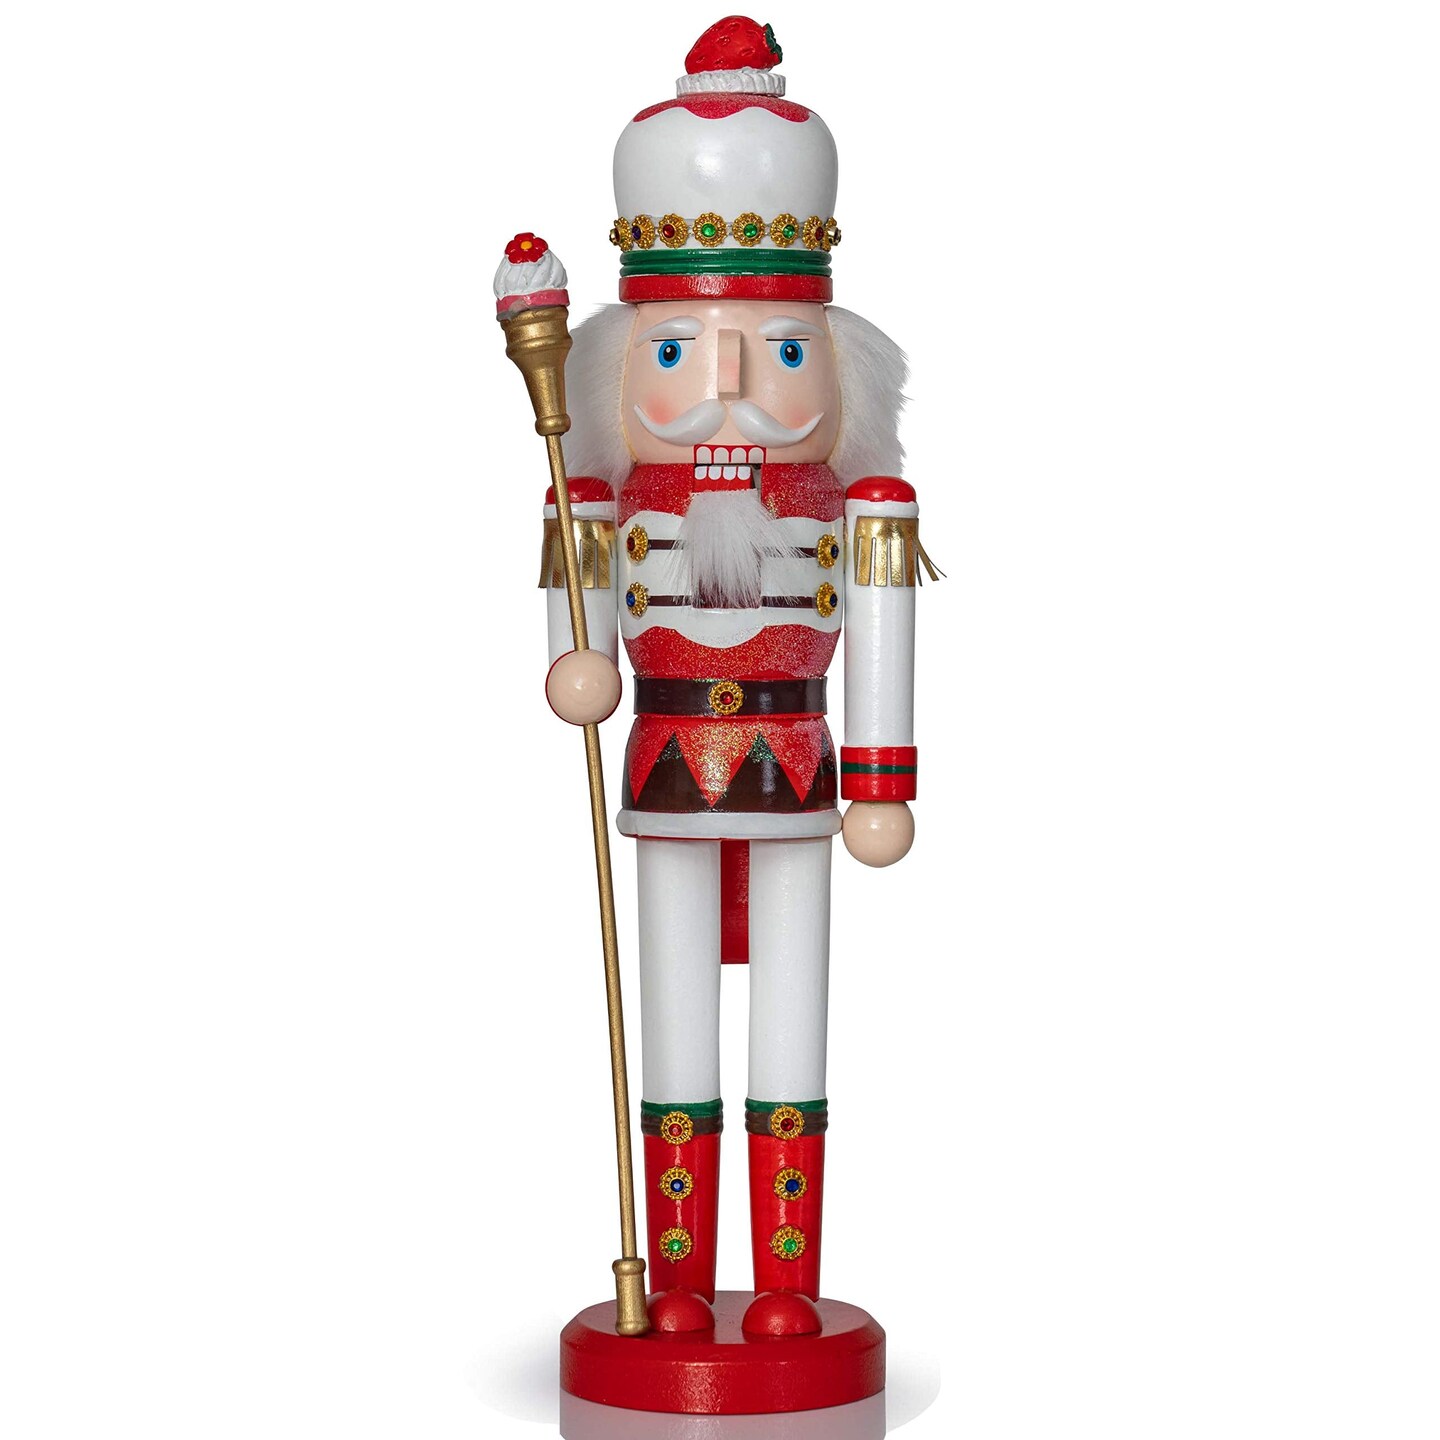 Ornativity Strawberry Toy Soldier Nutcracker - Wooden Strawberry Hat with Cupcake Scepter King Theme Christmas Nutcracker Figure Holiday Decoration